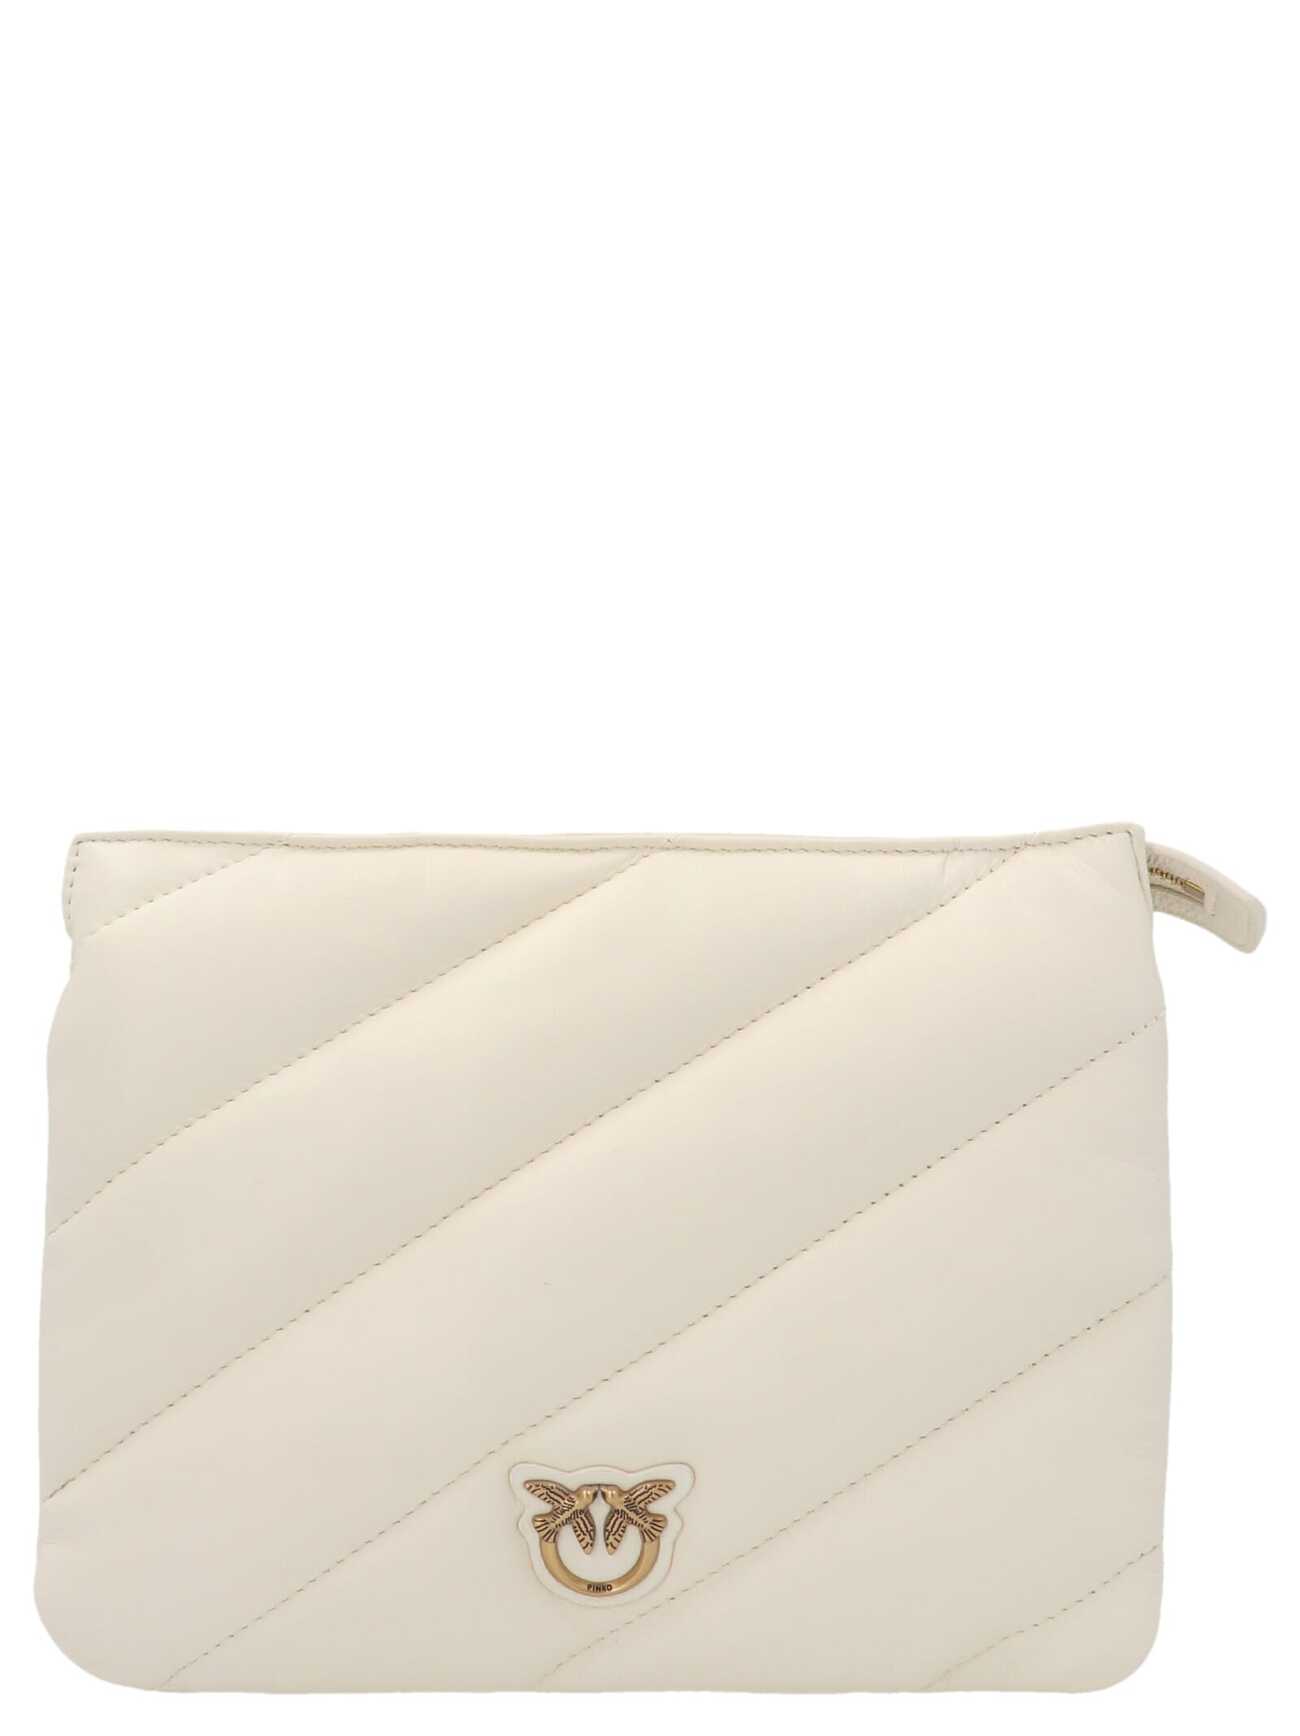 Pinko twins Small Maxi Quilt Bag in gold / bianco